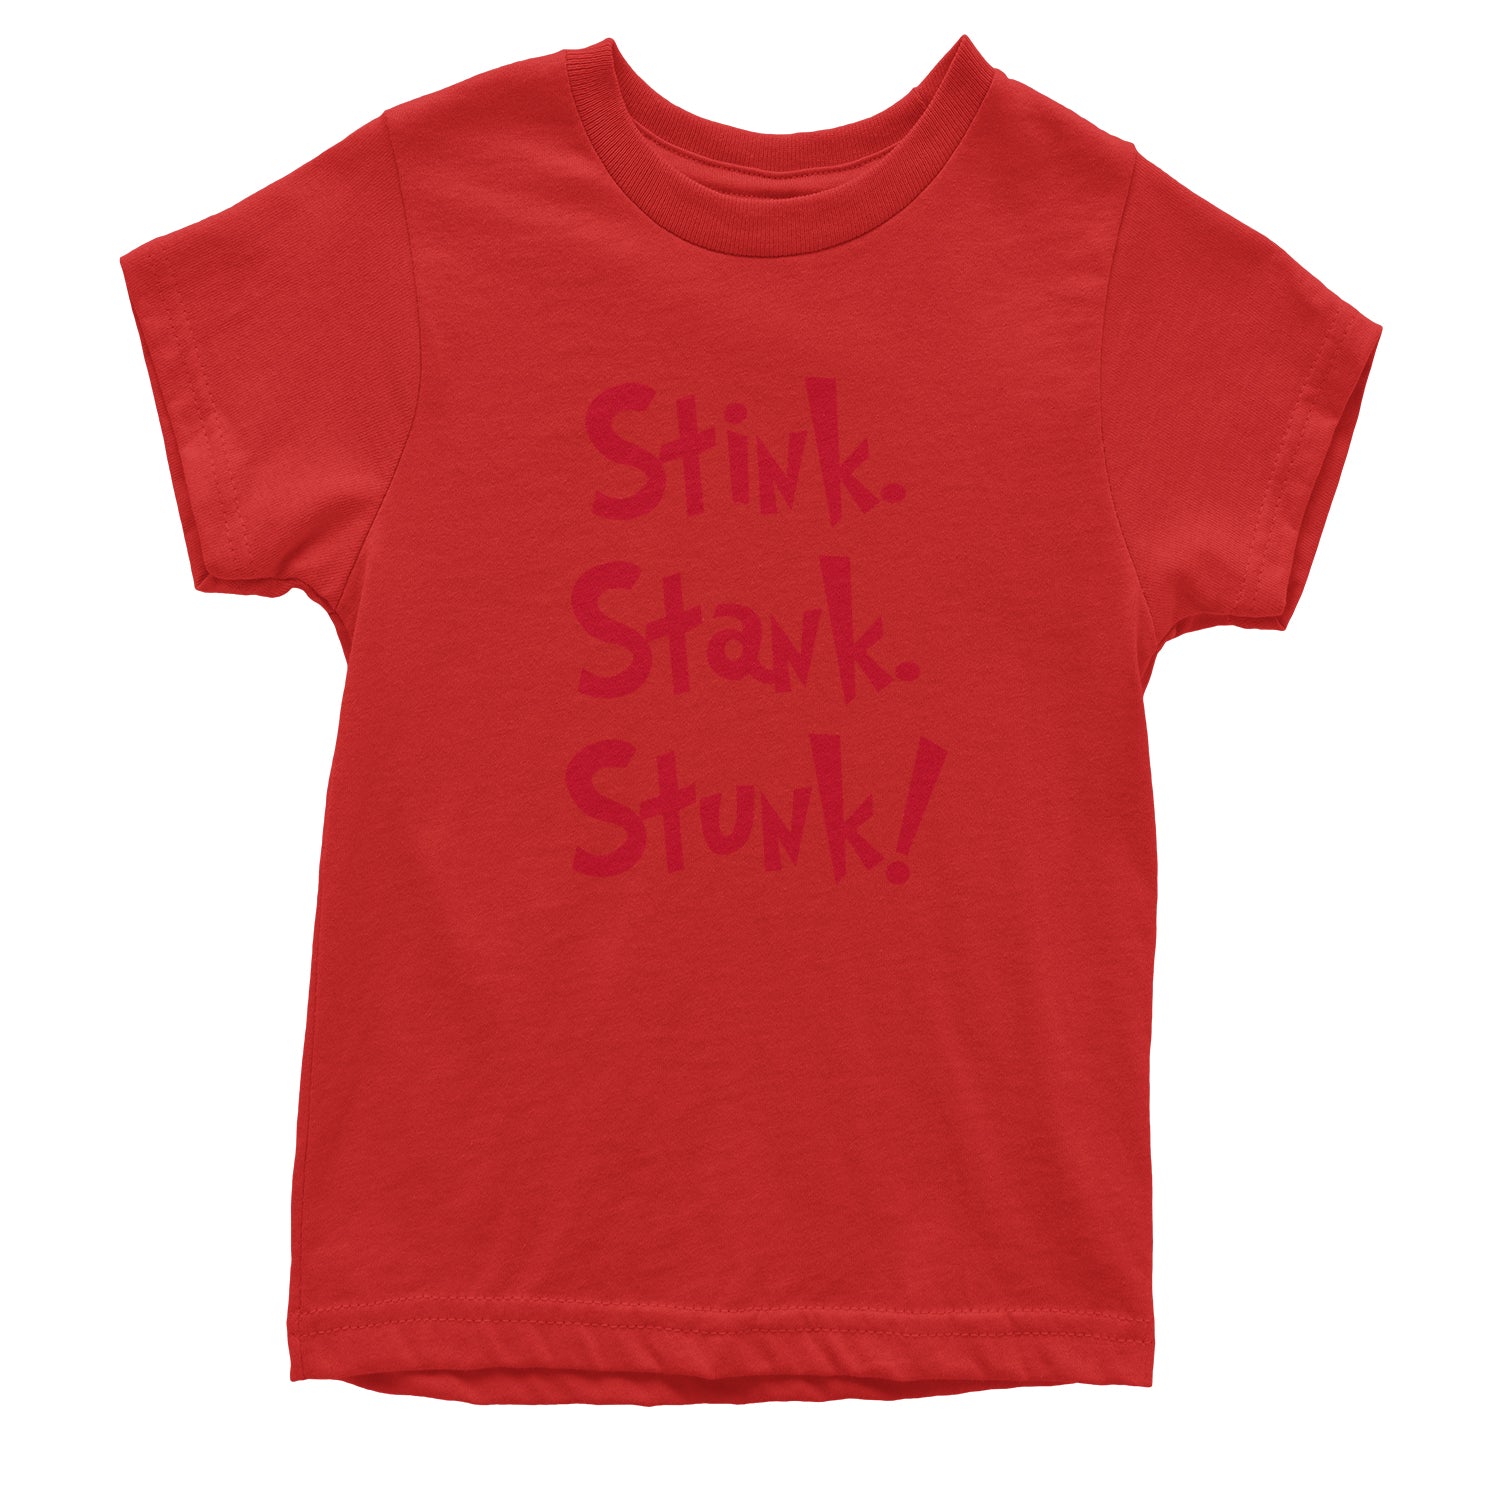 Stink Stank Stunk Grinch Youth T-shirt christmas, holiday, sweater, ugly, xmas by Expression Tees